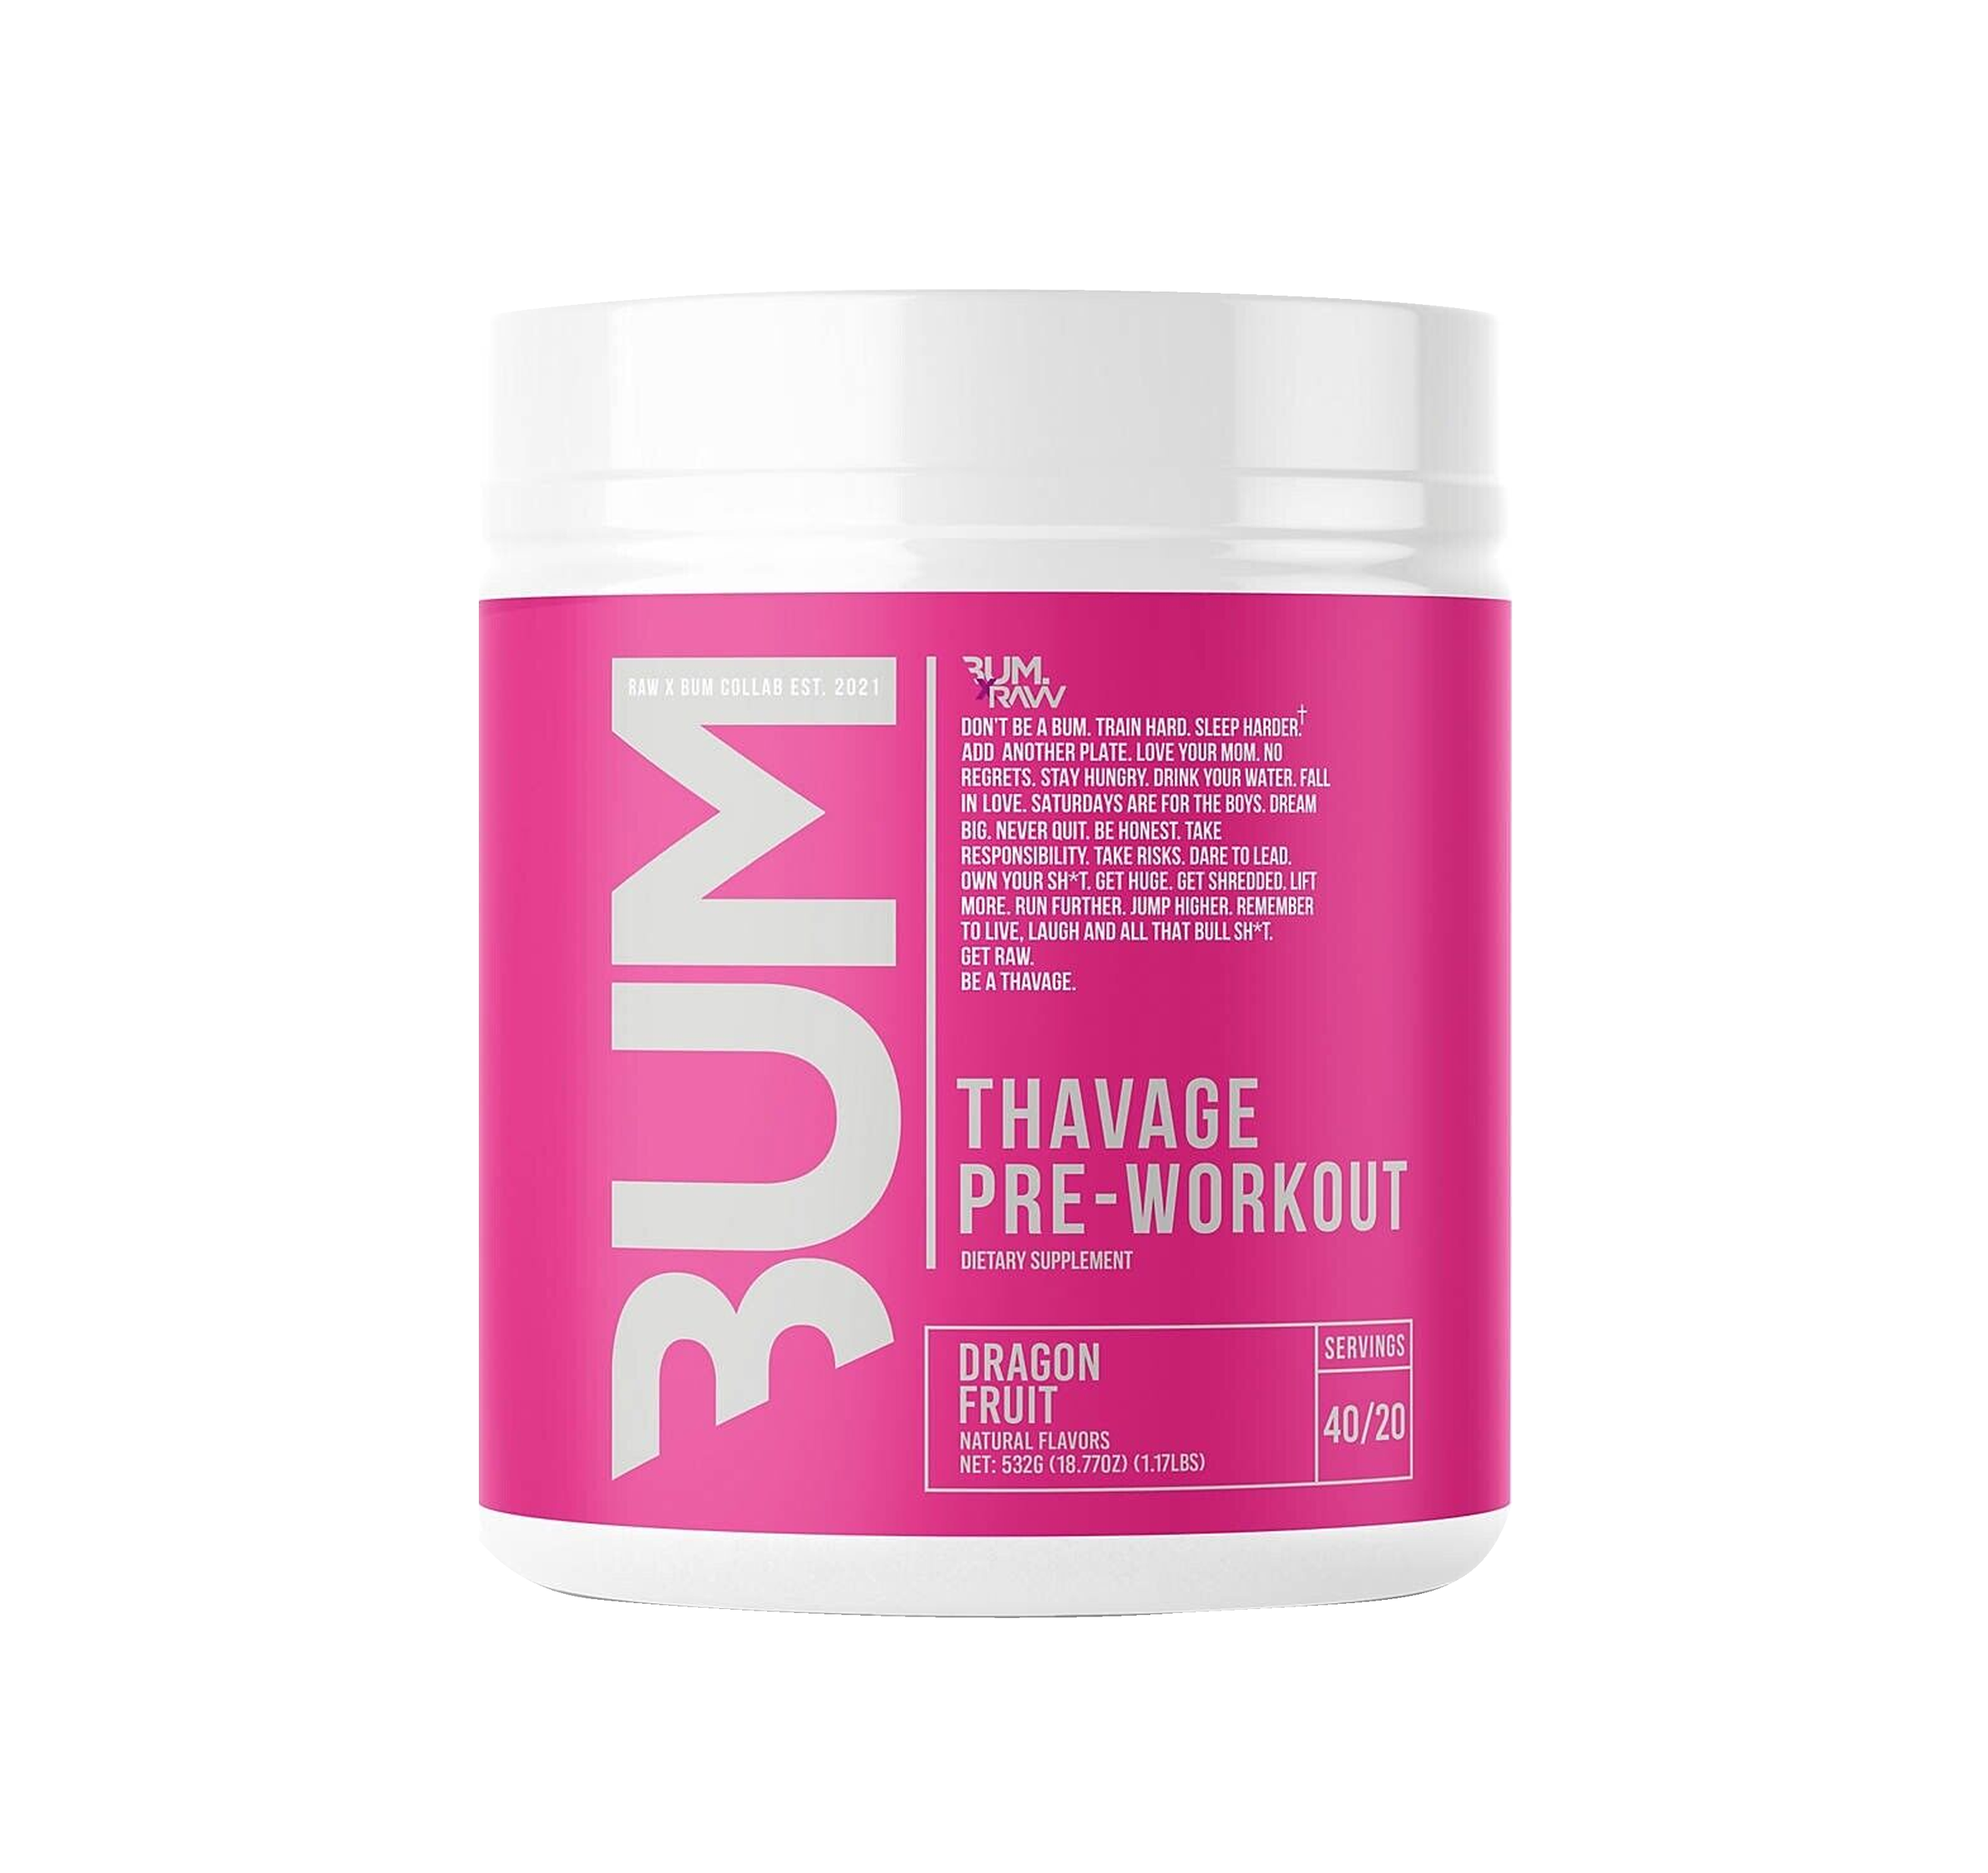 RAW NUTRITION THAVAGE PRE-WORKOUT